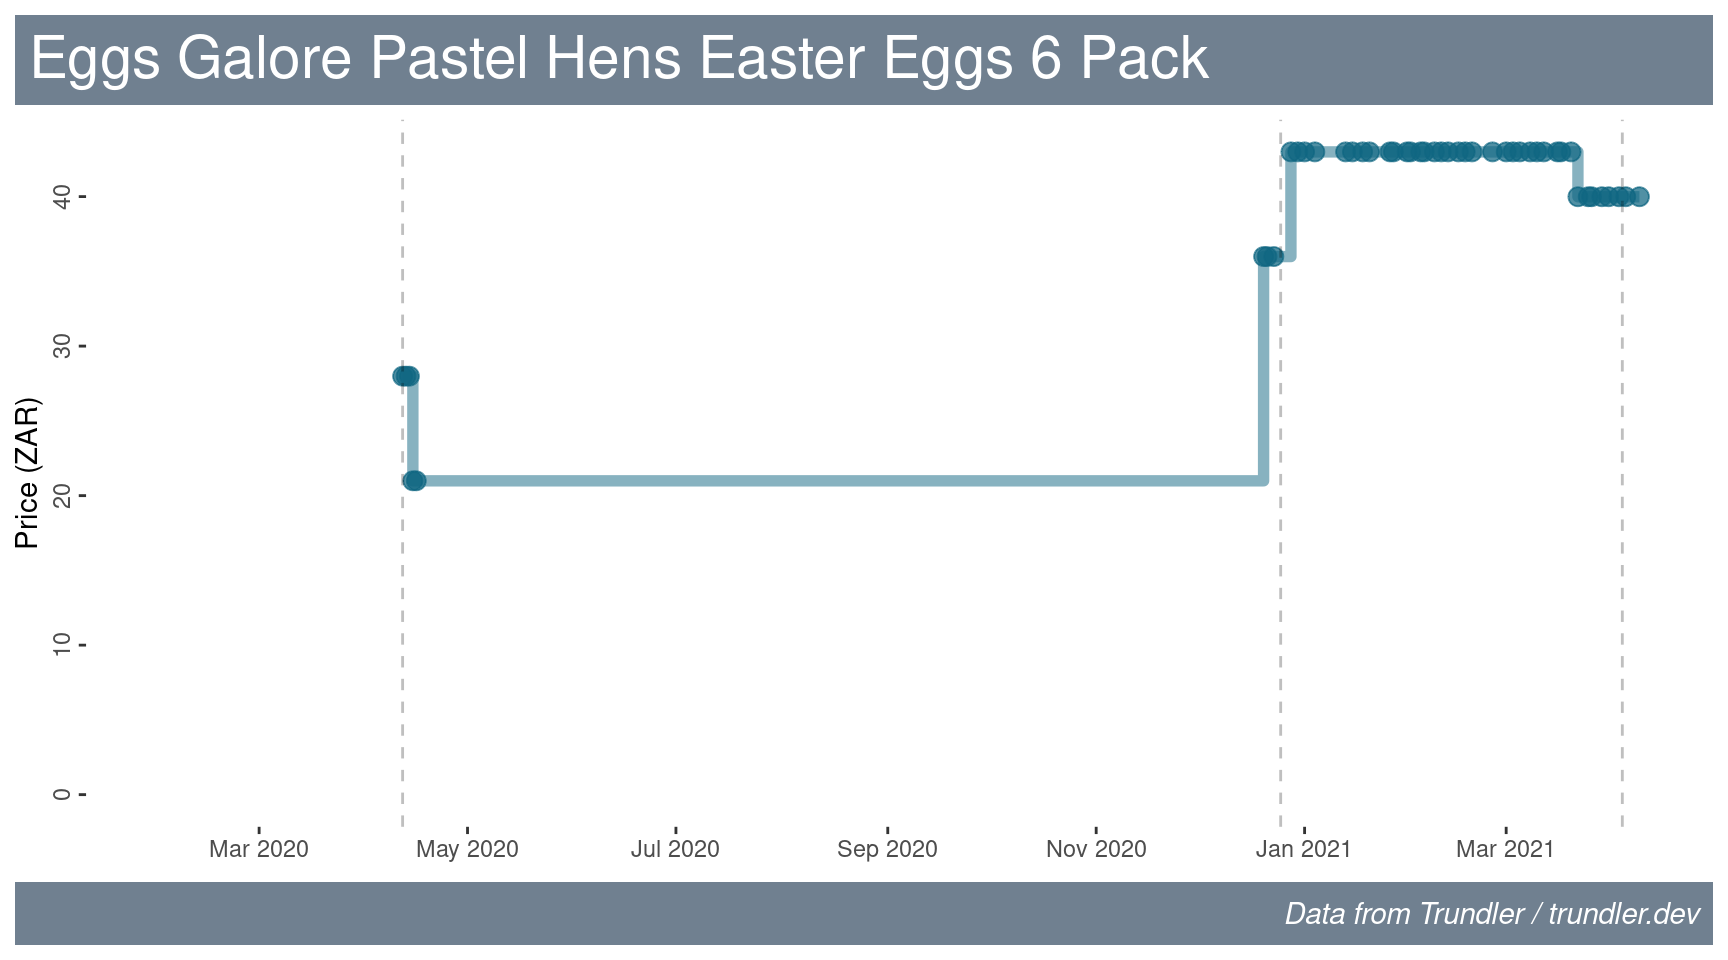 Price history for Eggs Galore Pastel Hens Easter Eggs.